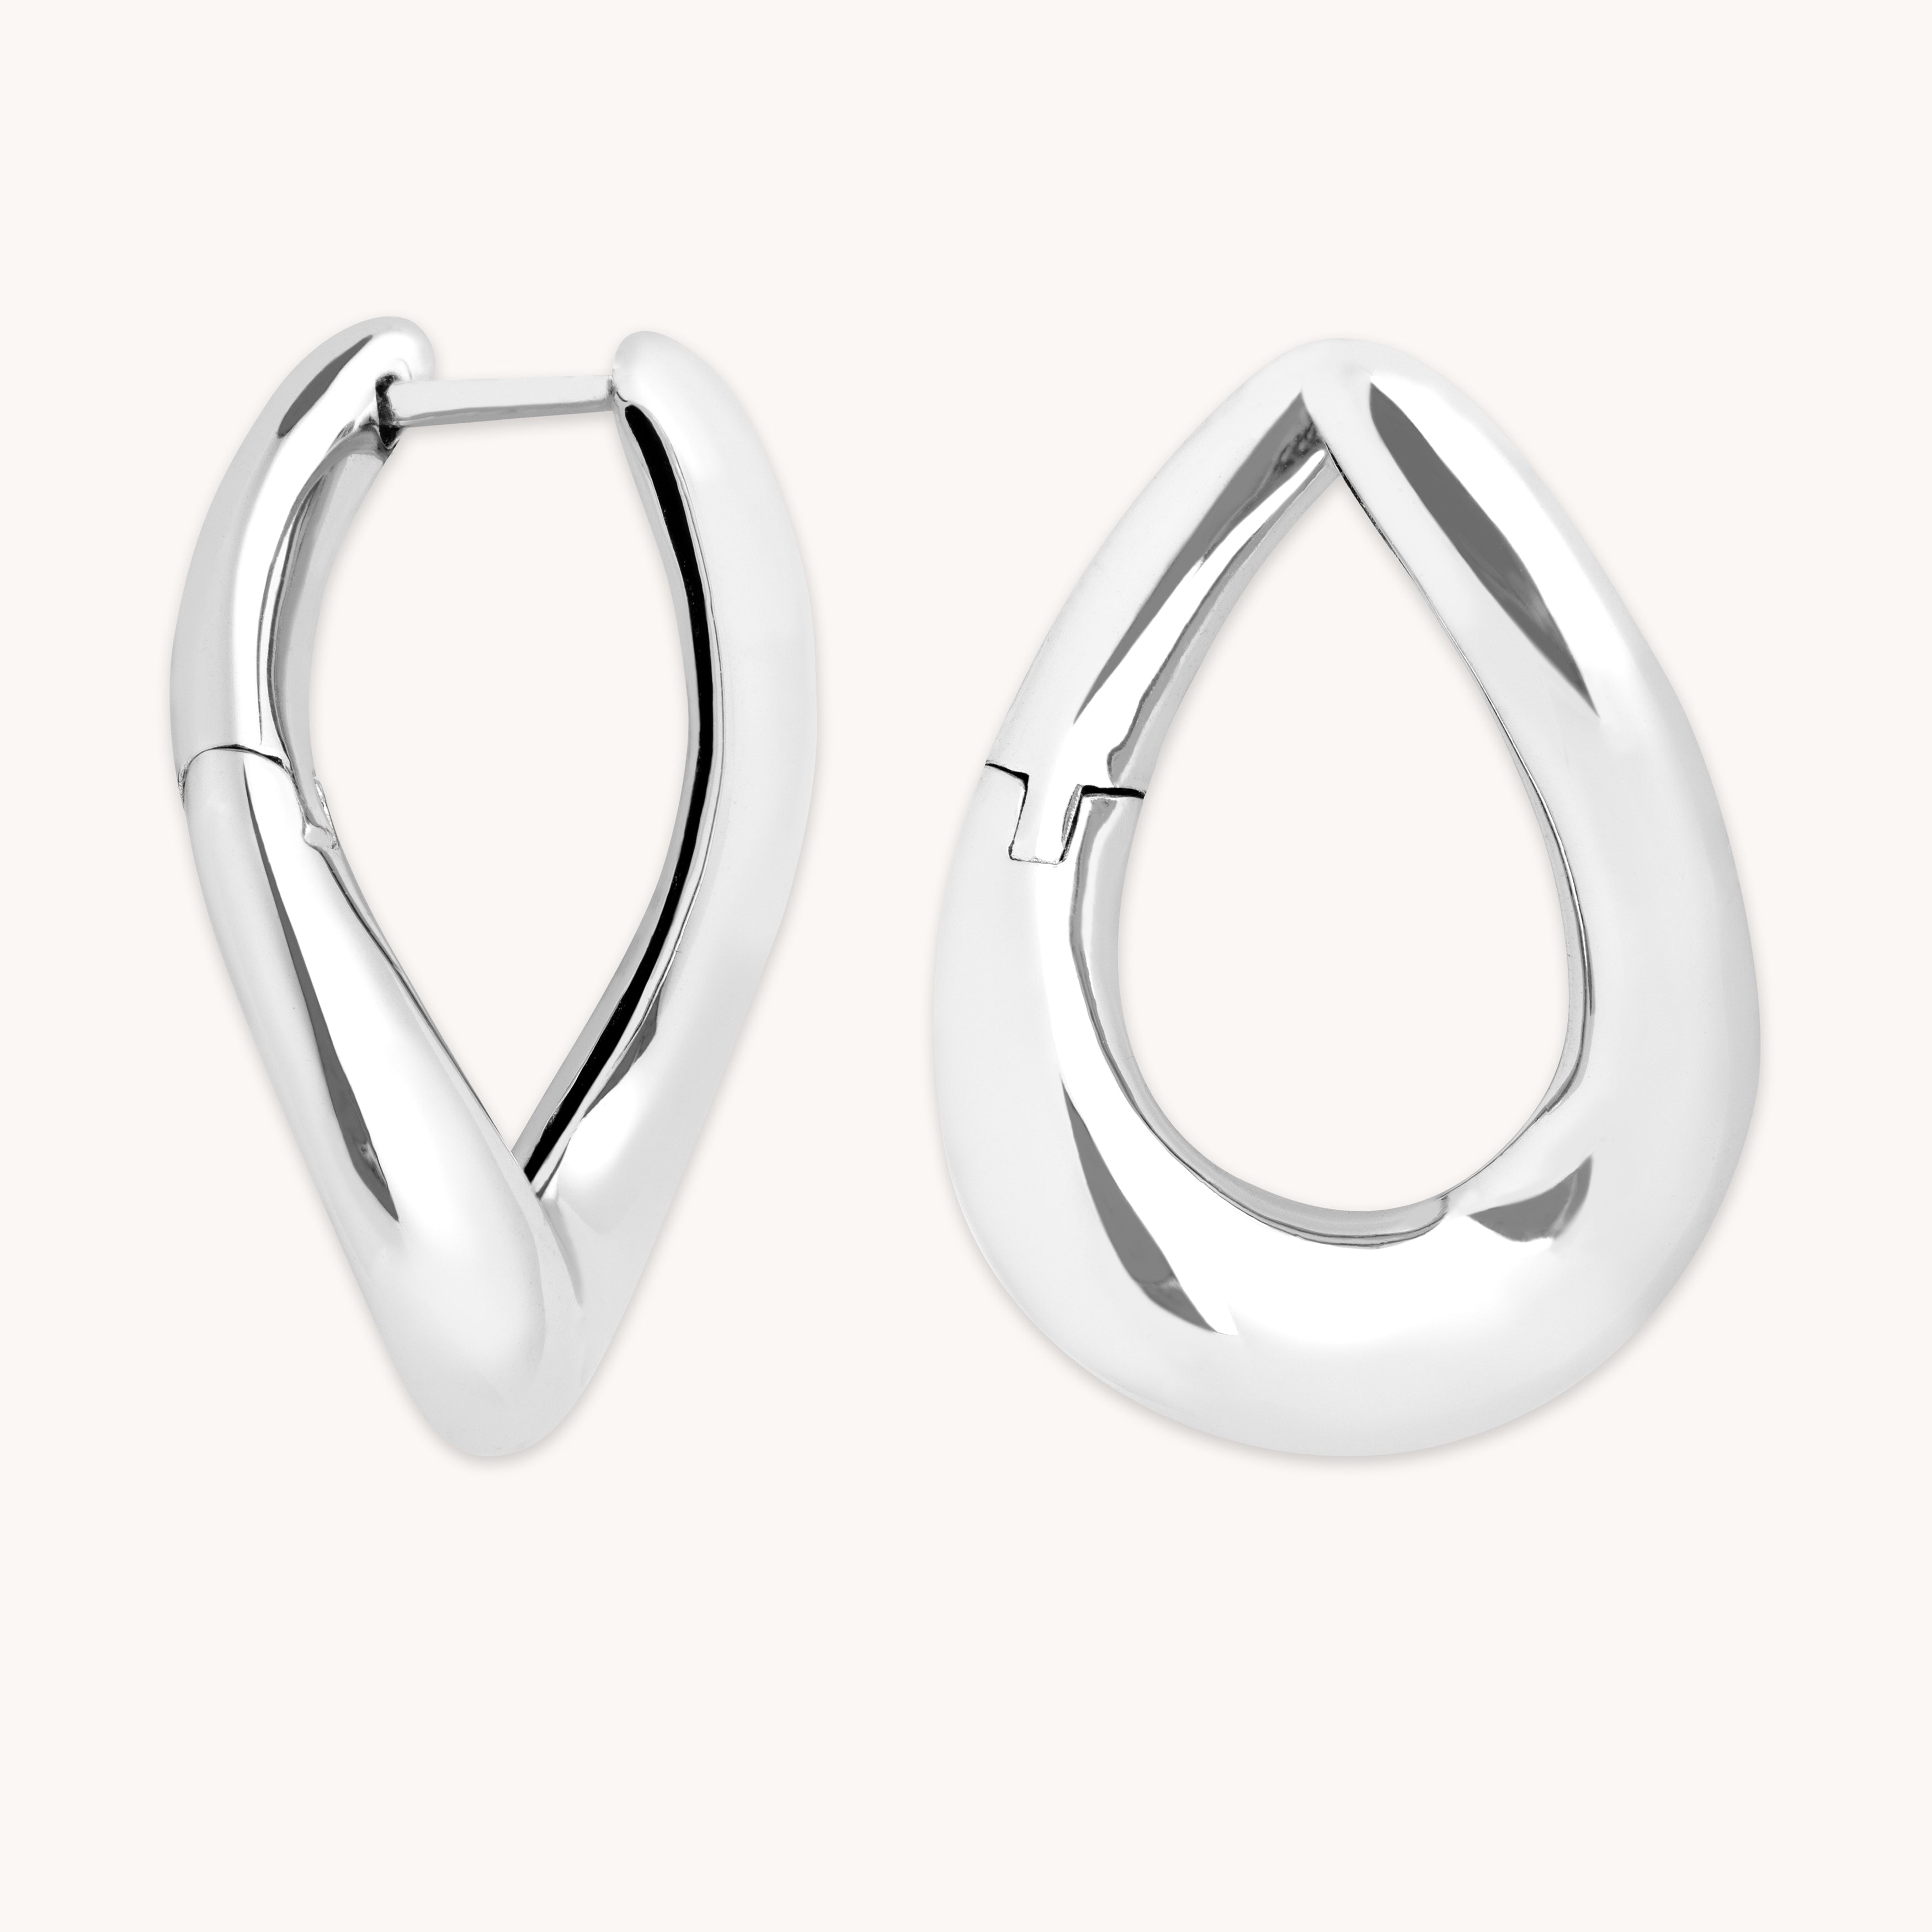 Molten Large Hoops in Silver